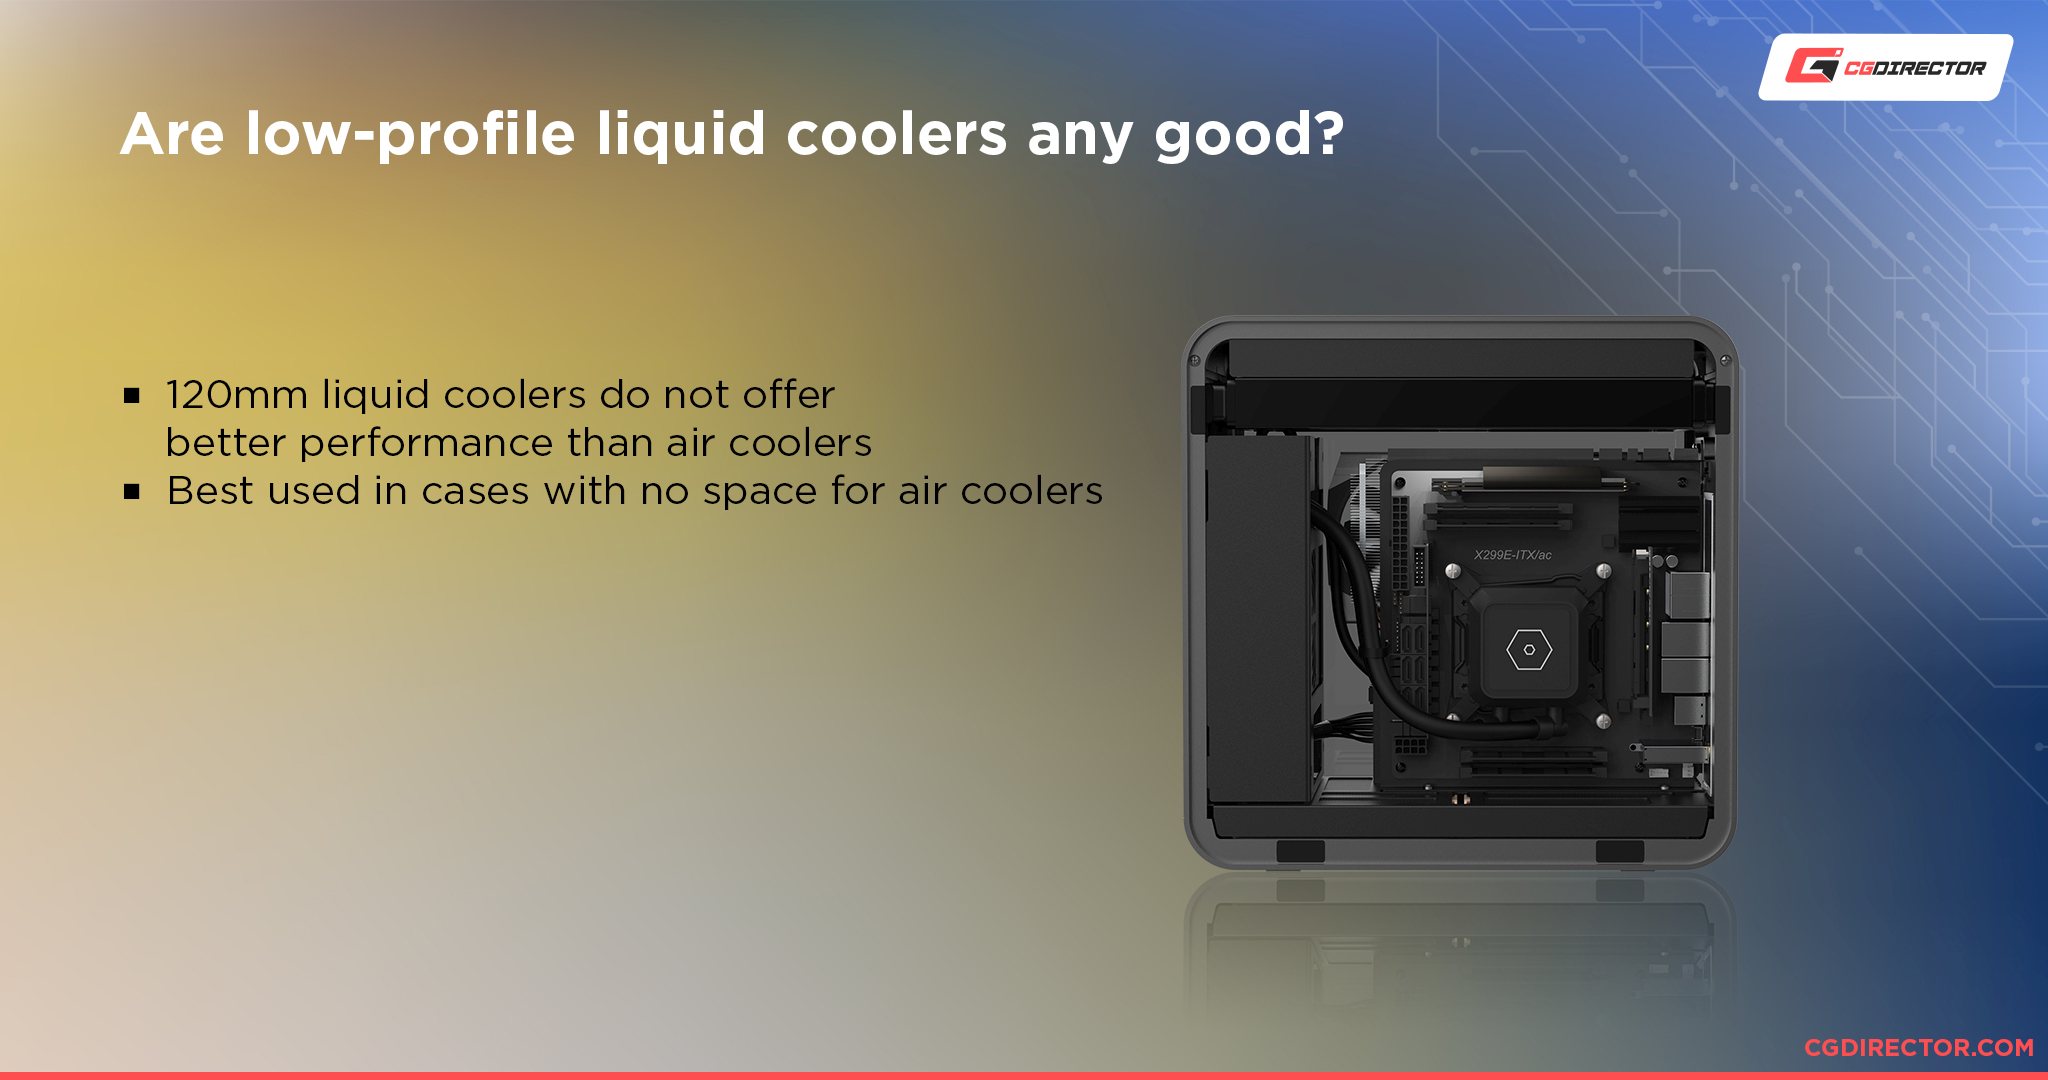 Are low-profile liquid coolers any good